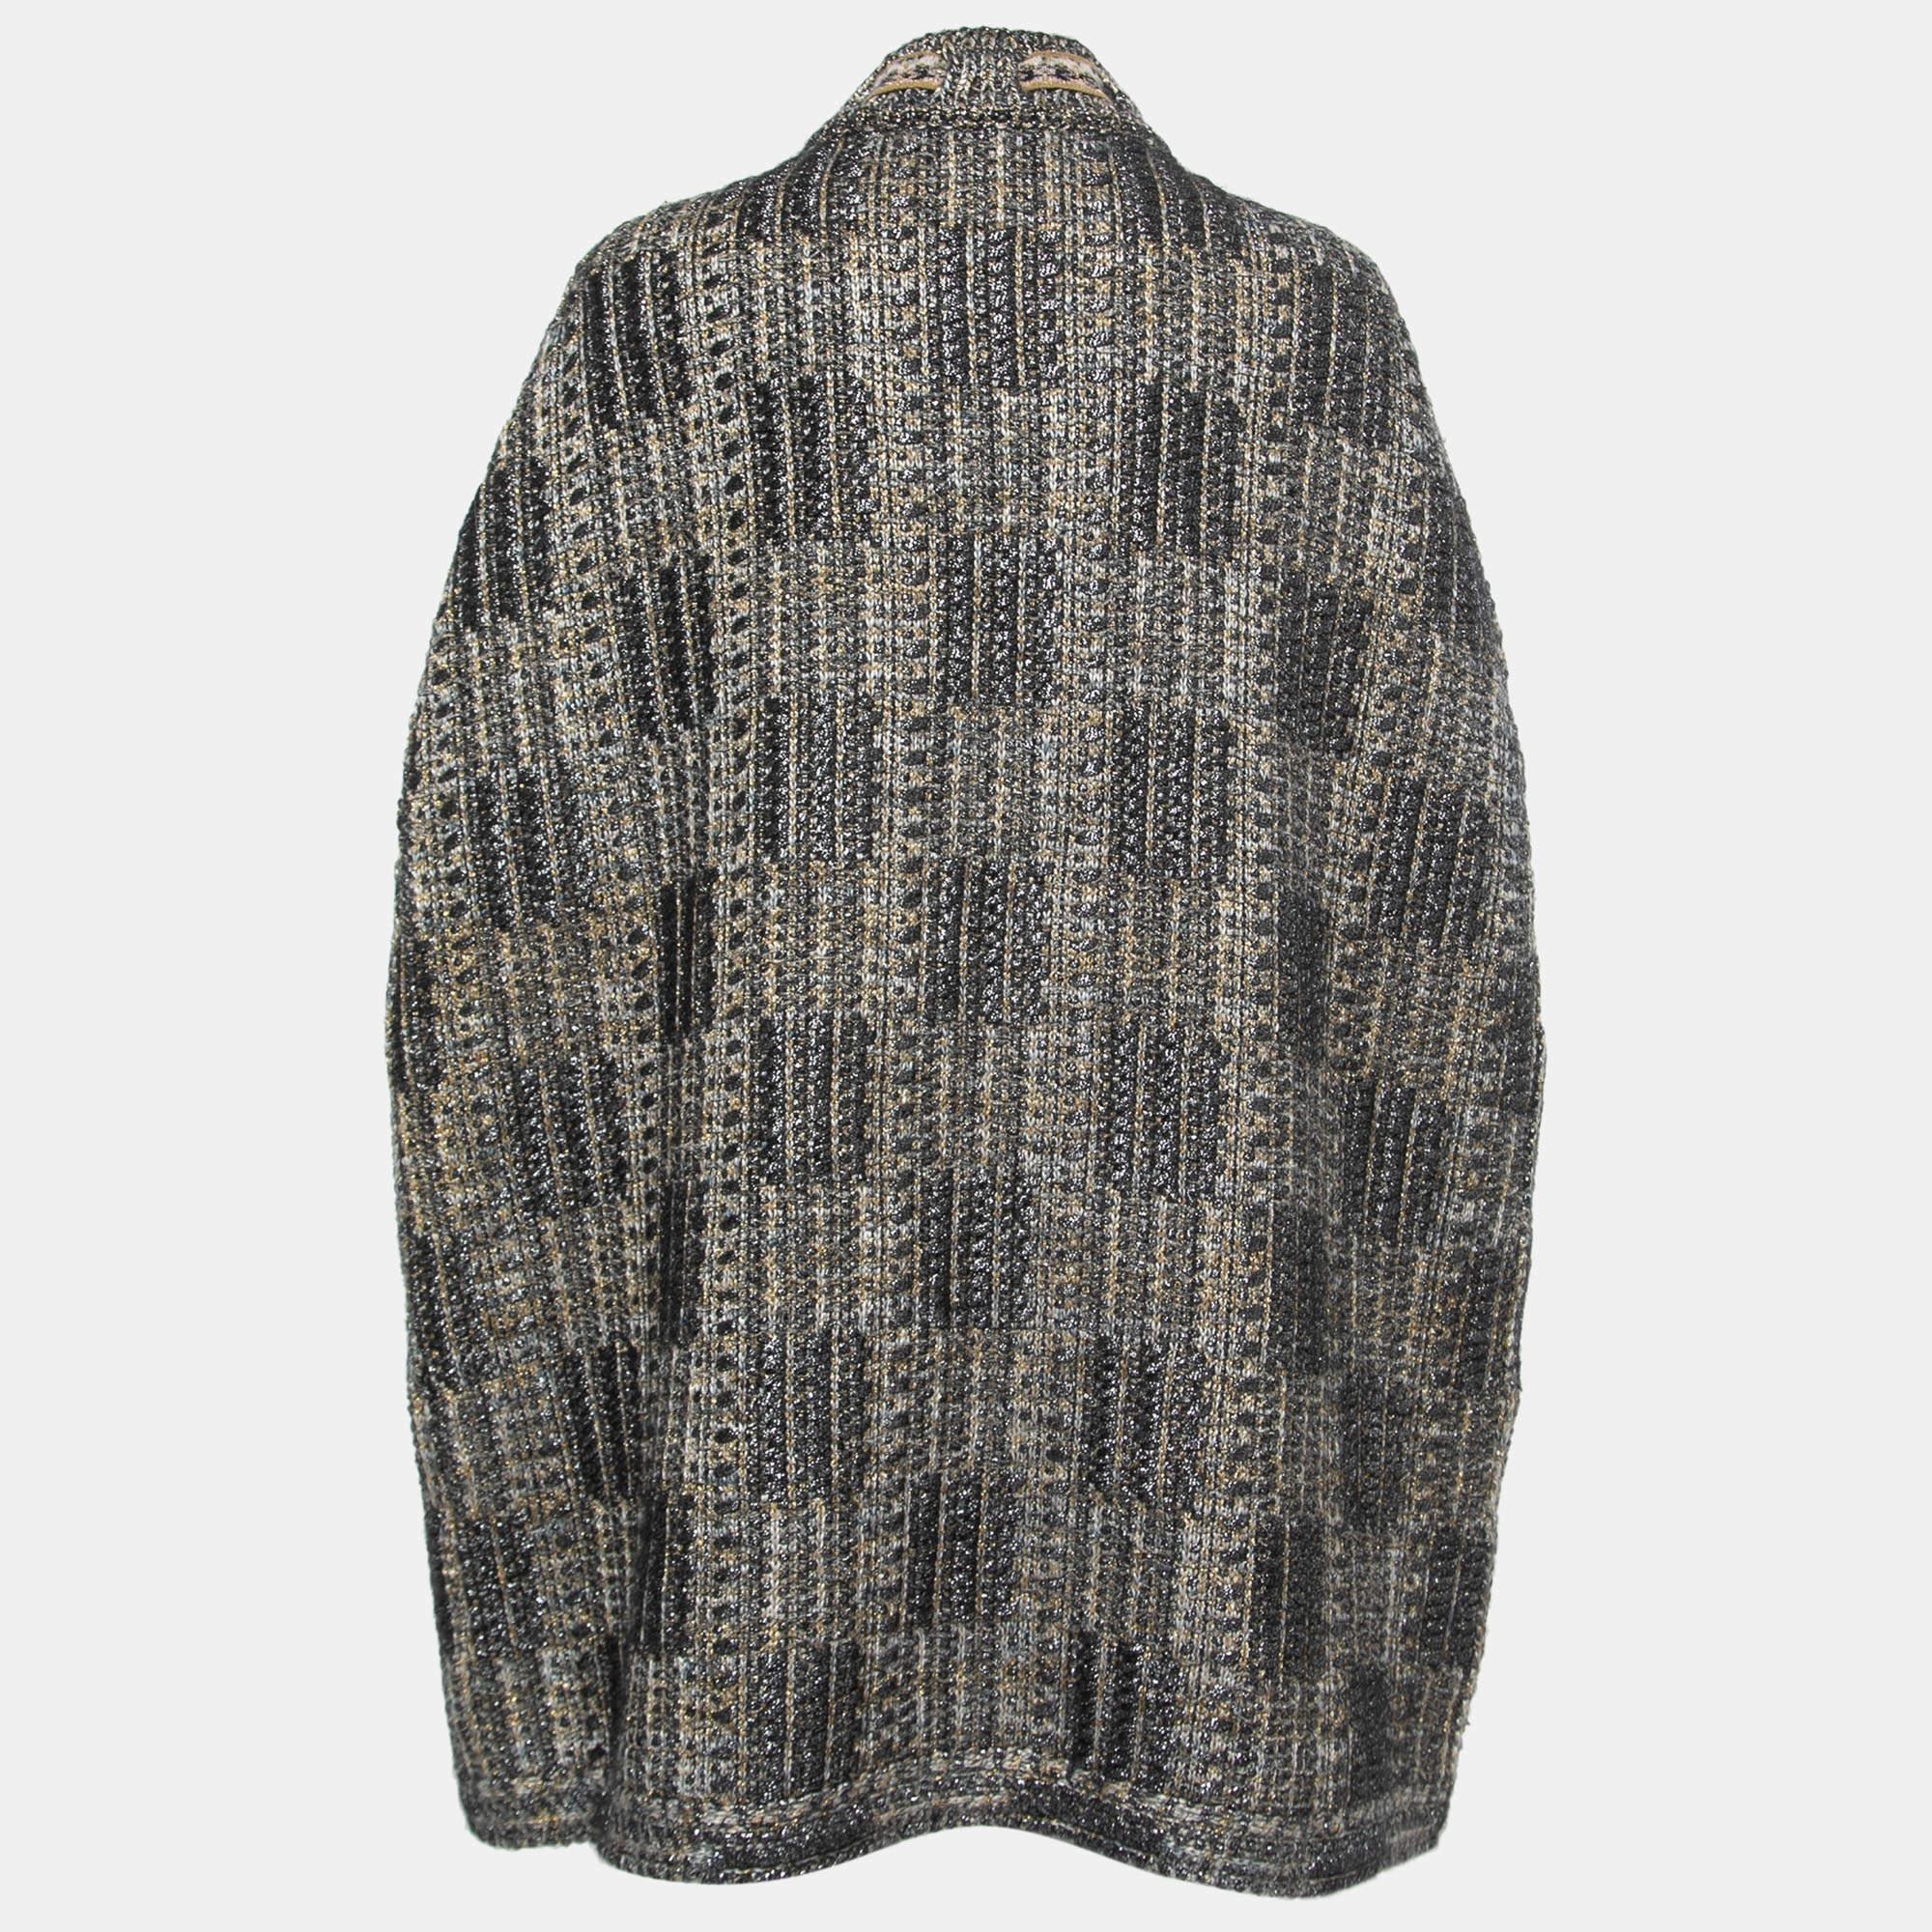 Your closet is never complete without a stunning poncho like this. This cardigan from Chanel is efficiently tailored using high-quality fabric in pleasant shades, which adds a luxurious edge to your outfit.

